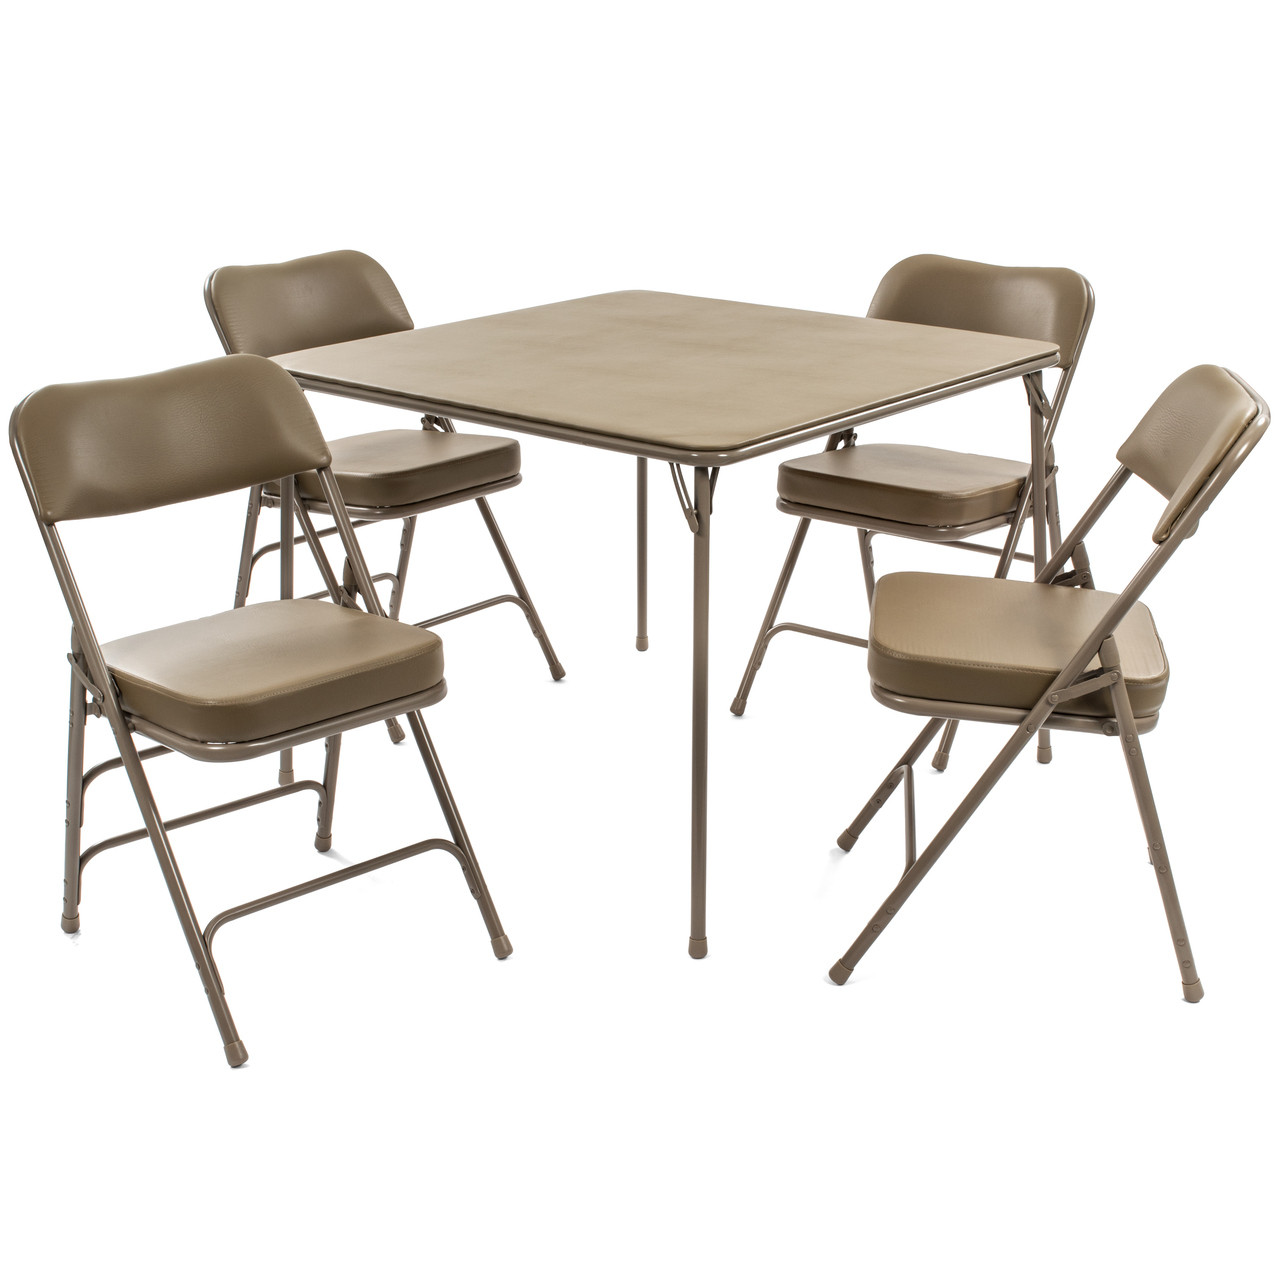 5pc XL Series Folding Card Table and Ultra Thick Padded Chair Set, Beige 